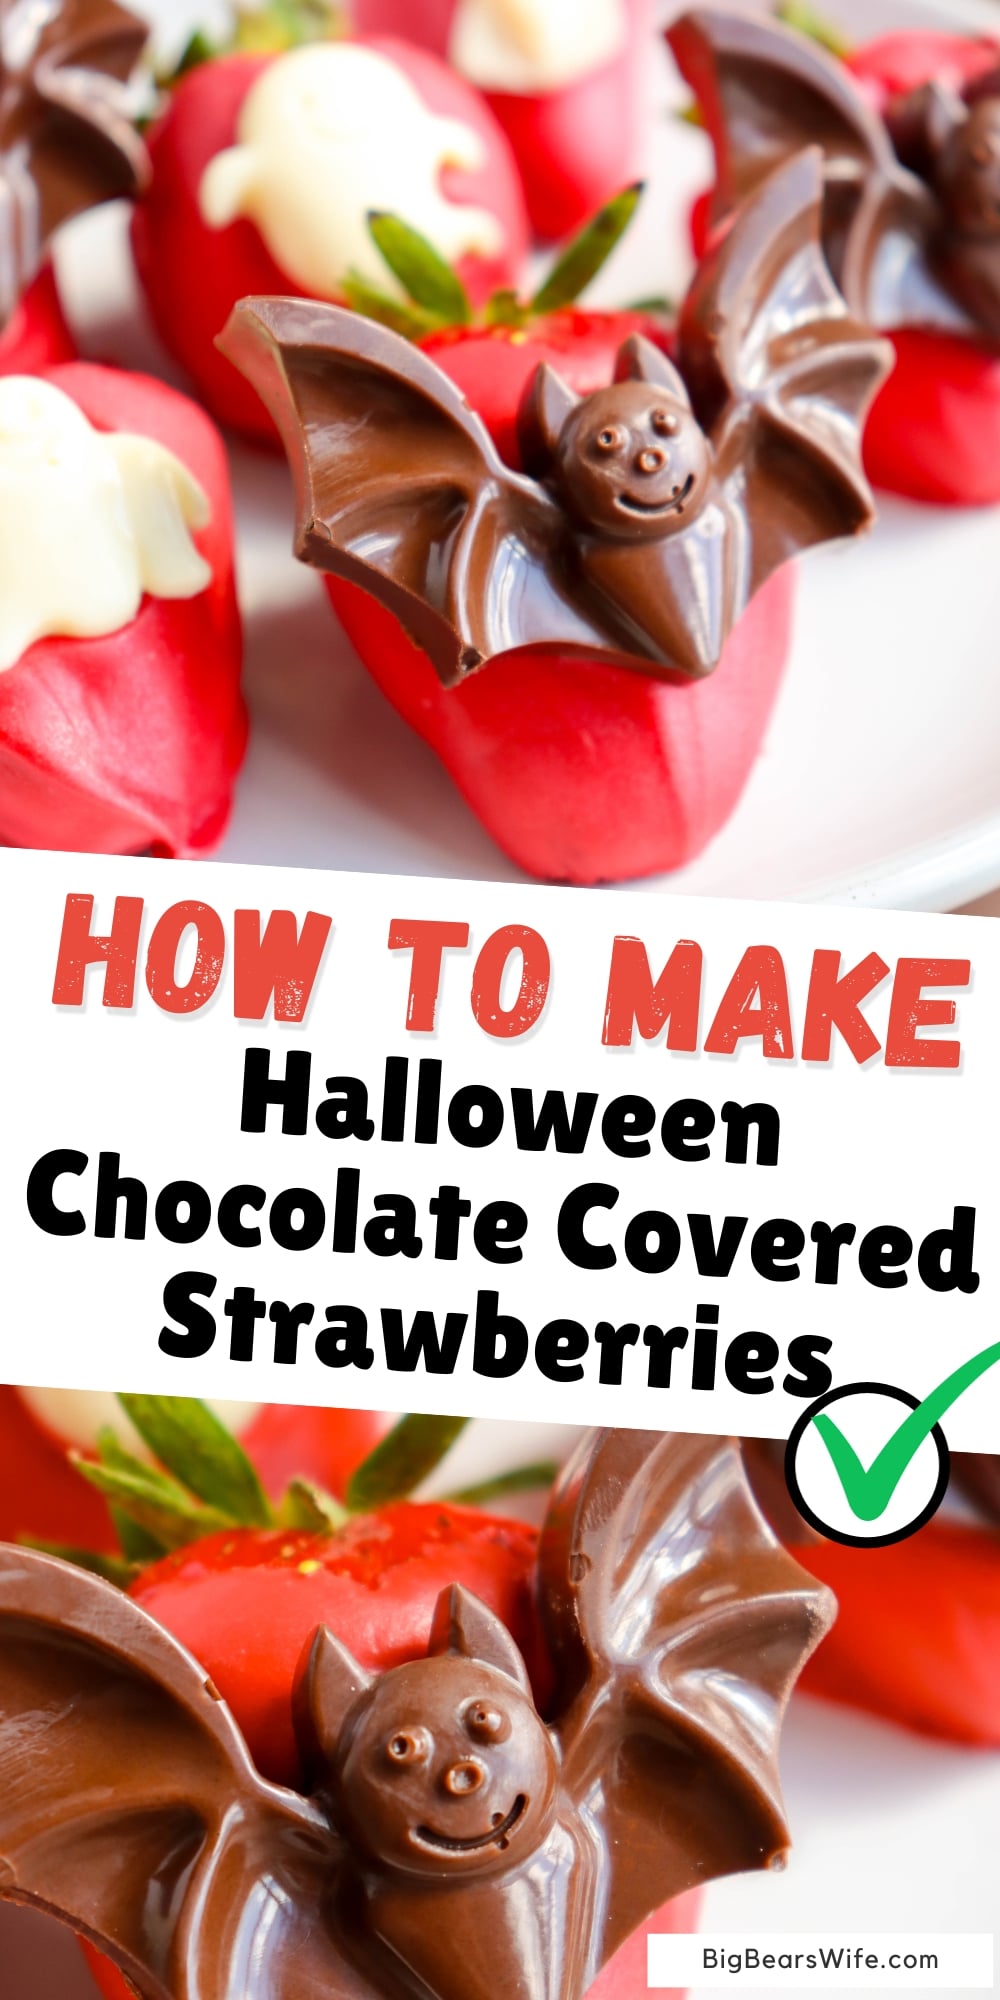 Get into the spirit of Halloween with spooky chocolate covered strawberries. Discover our step-by-step guide on how to craft these adorable and delicious Halloween Chocolate Covered Strawberries that will add a touch of spookiness to any gathering. Whether you're hosting a costume party or simply want to surprise your loved ones, these adorably haunting delights are sure to captivate everyone's attention. via @bigbearswife